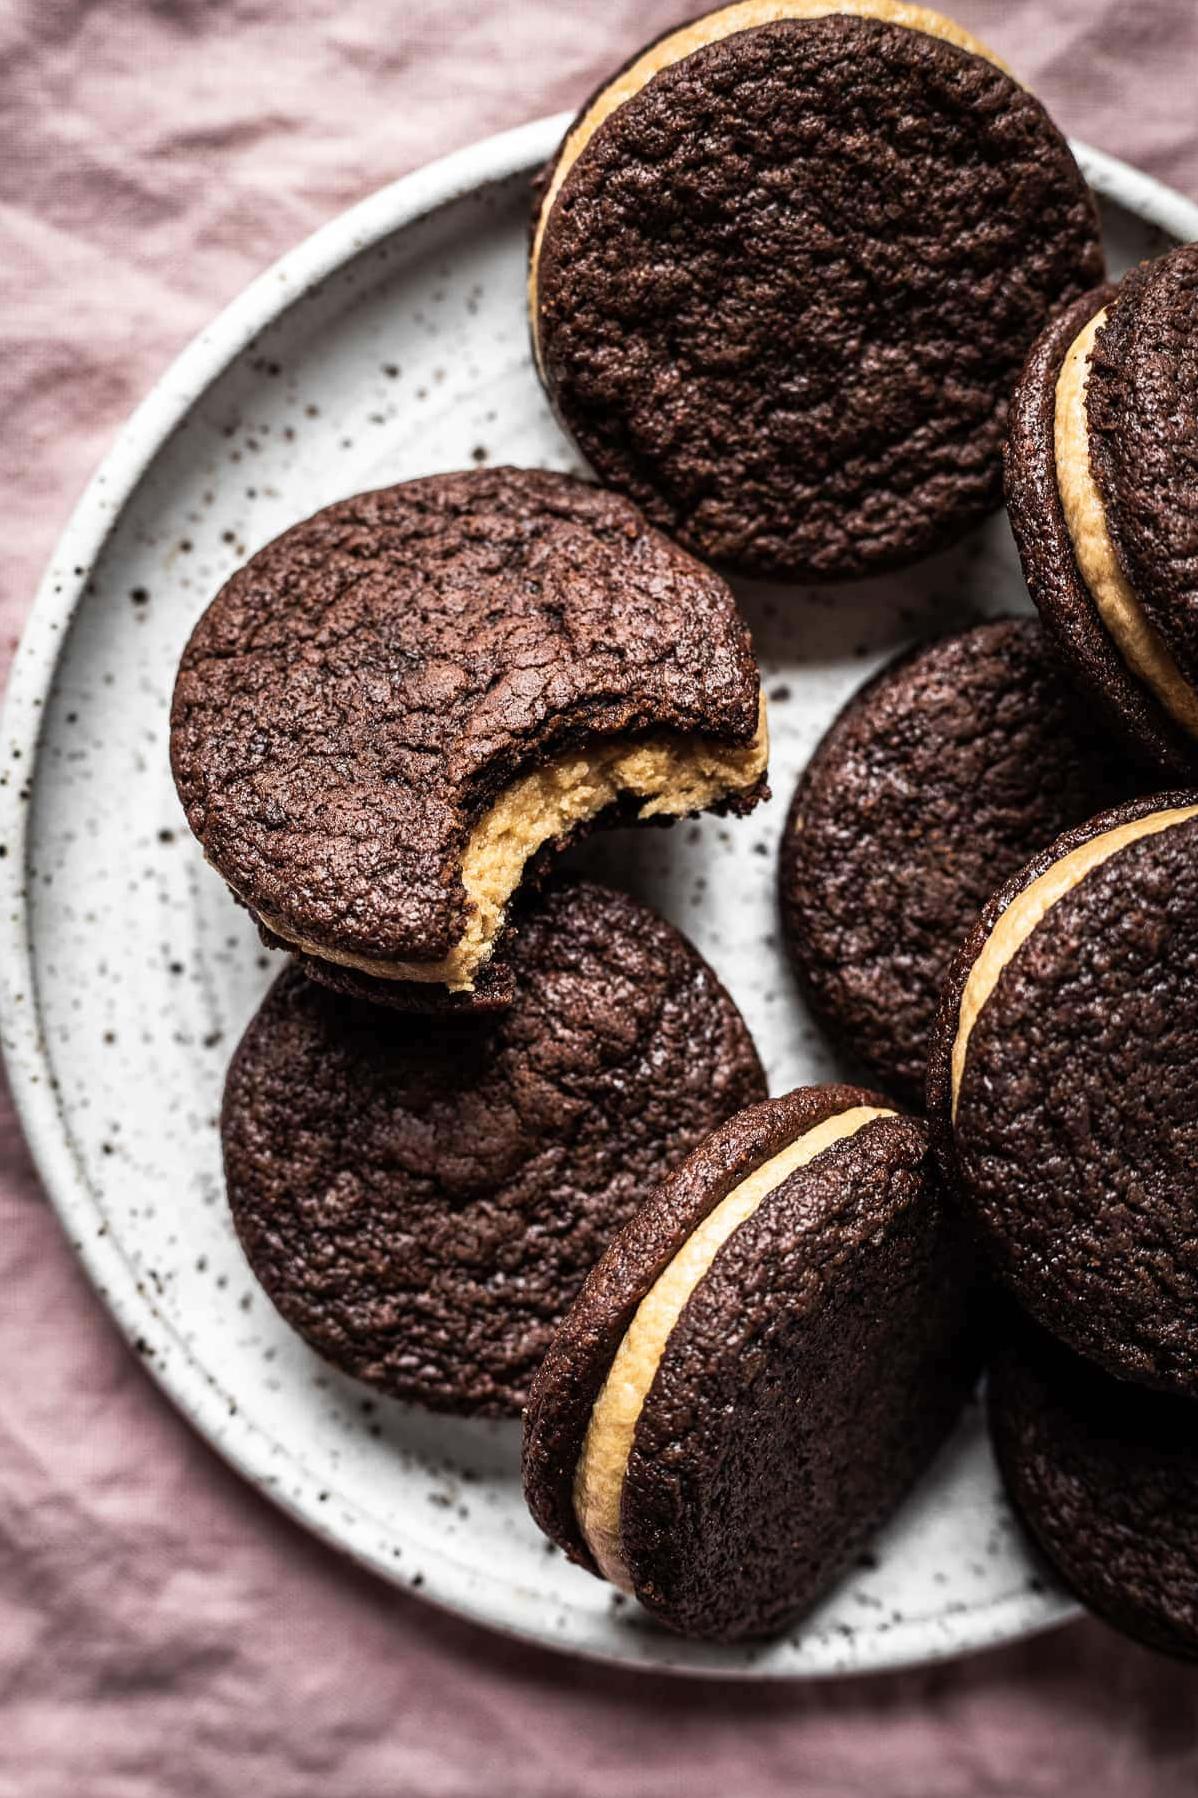  Make your afternoon coffee a little more exciting with our Chocolate Coffee Cream-Filled Cookies!